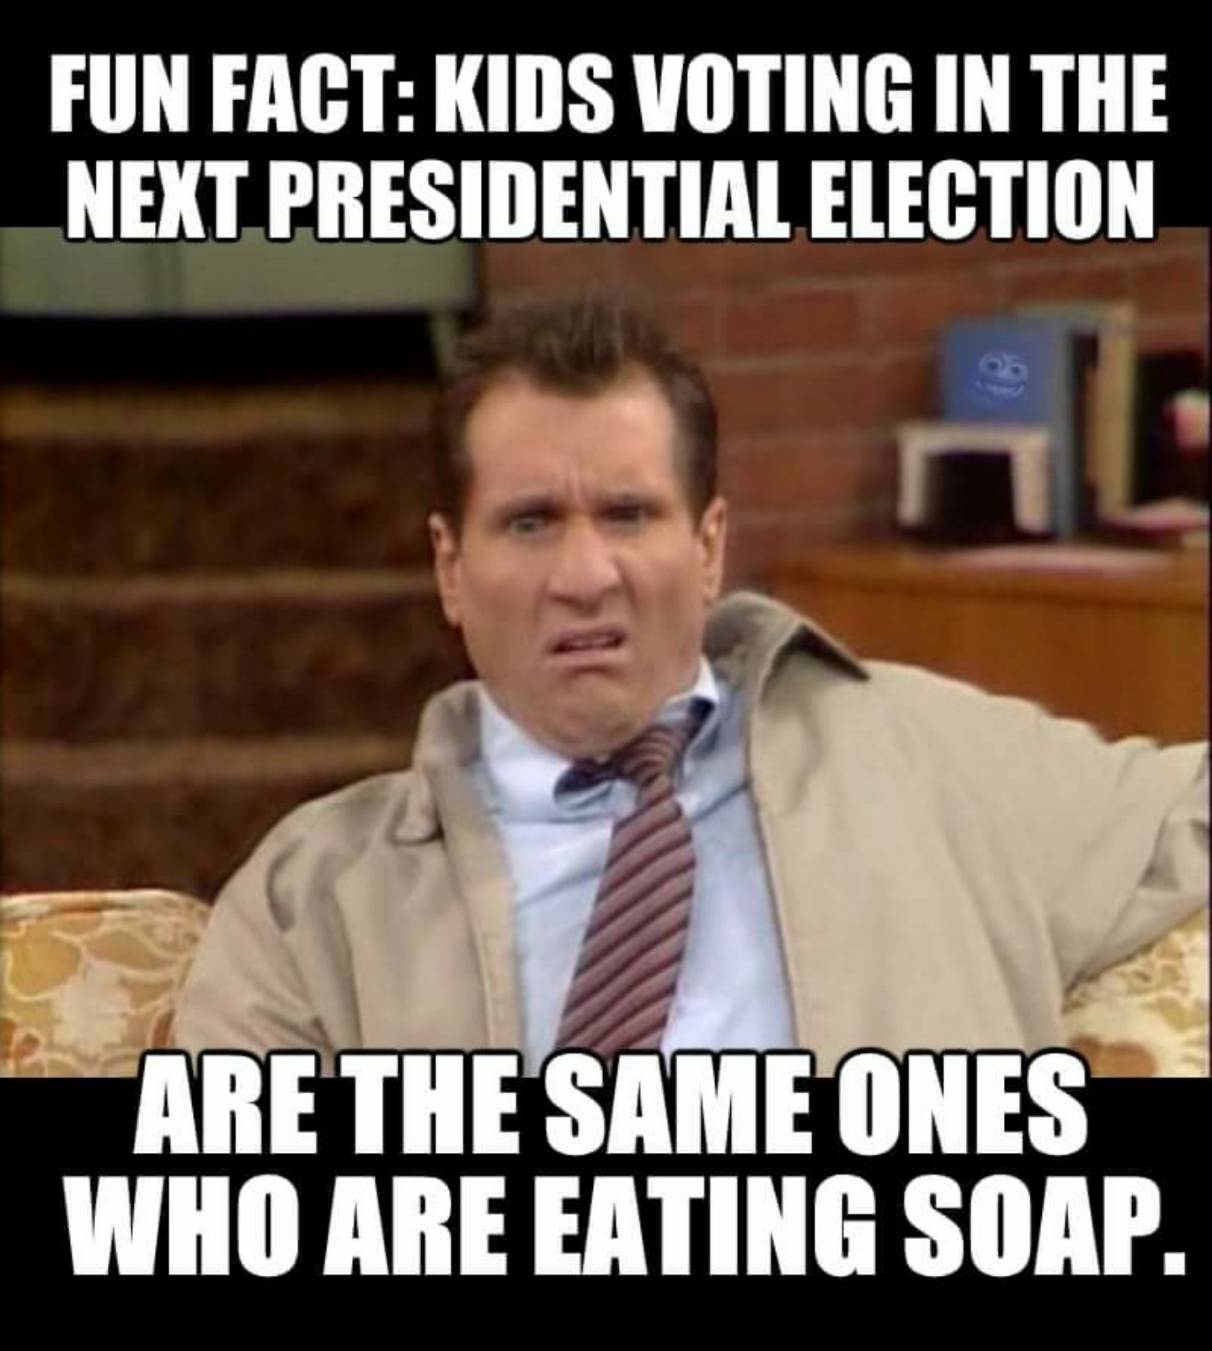 action can - Fun Fact Kids Voting In The Next Presidential Election Are The Same Ones Who Are Eating Soap.